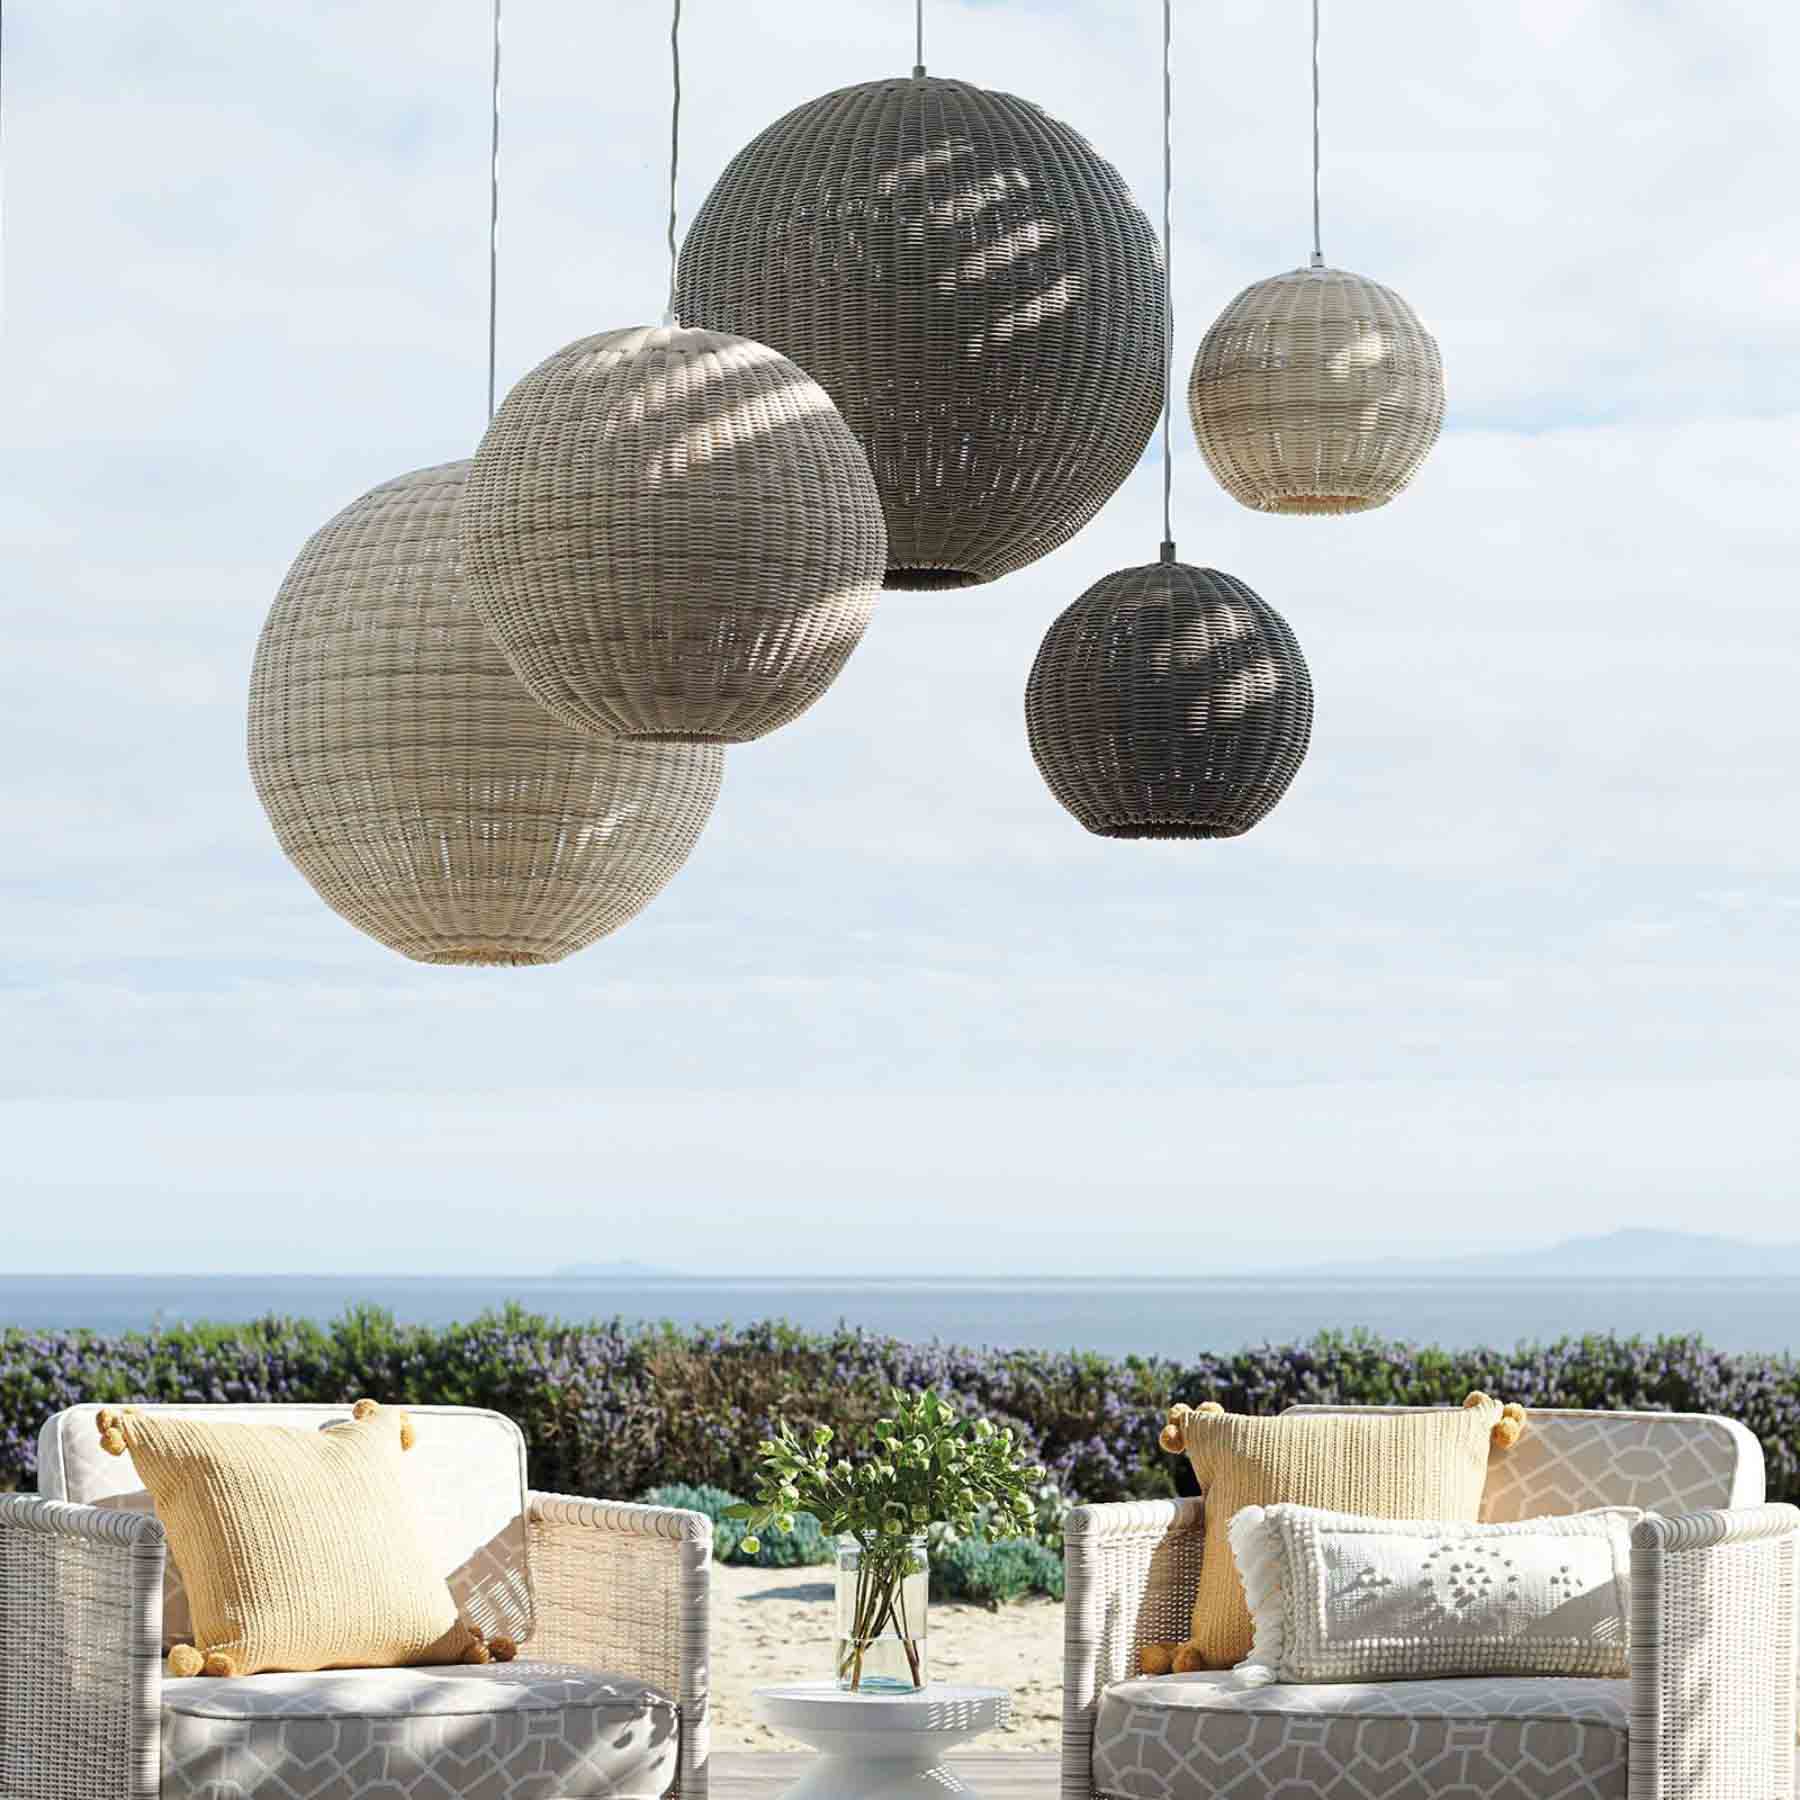 rattan lighting fixtures boast a significantly longer lifespan compared to most metal or plastic alternatives